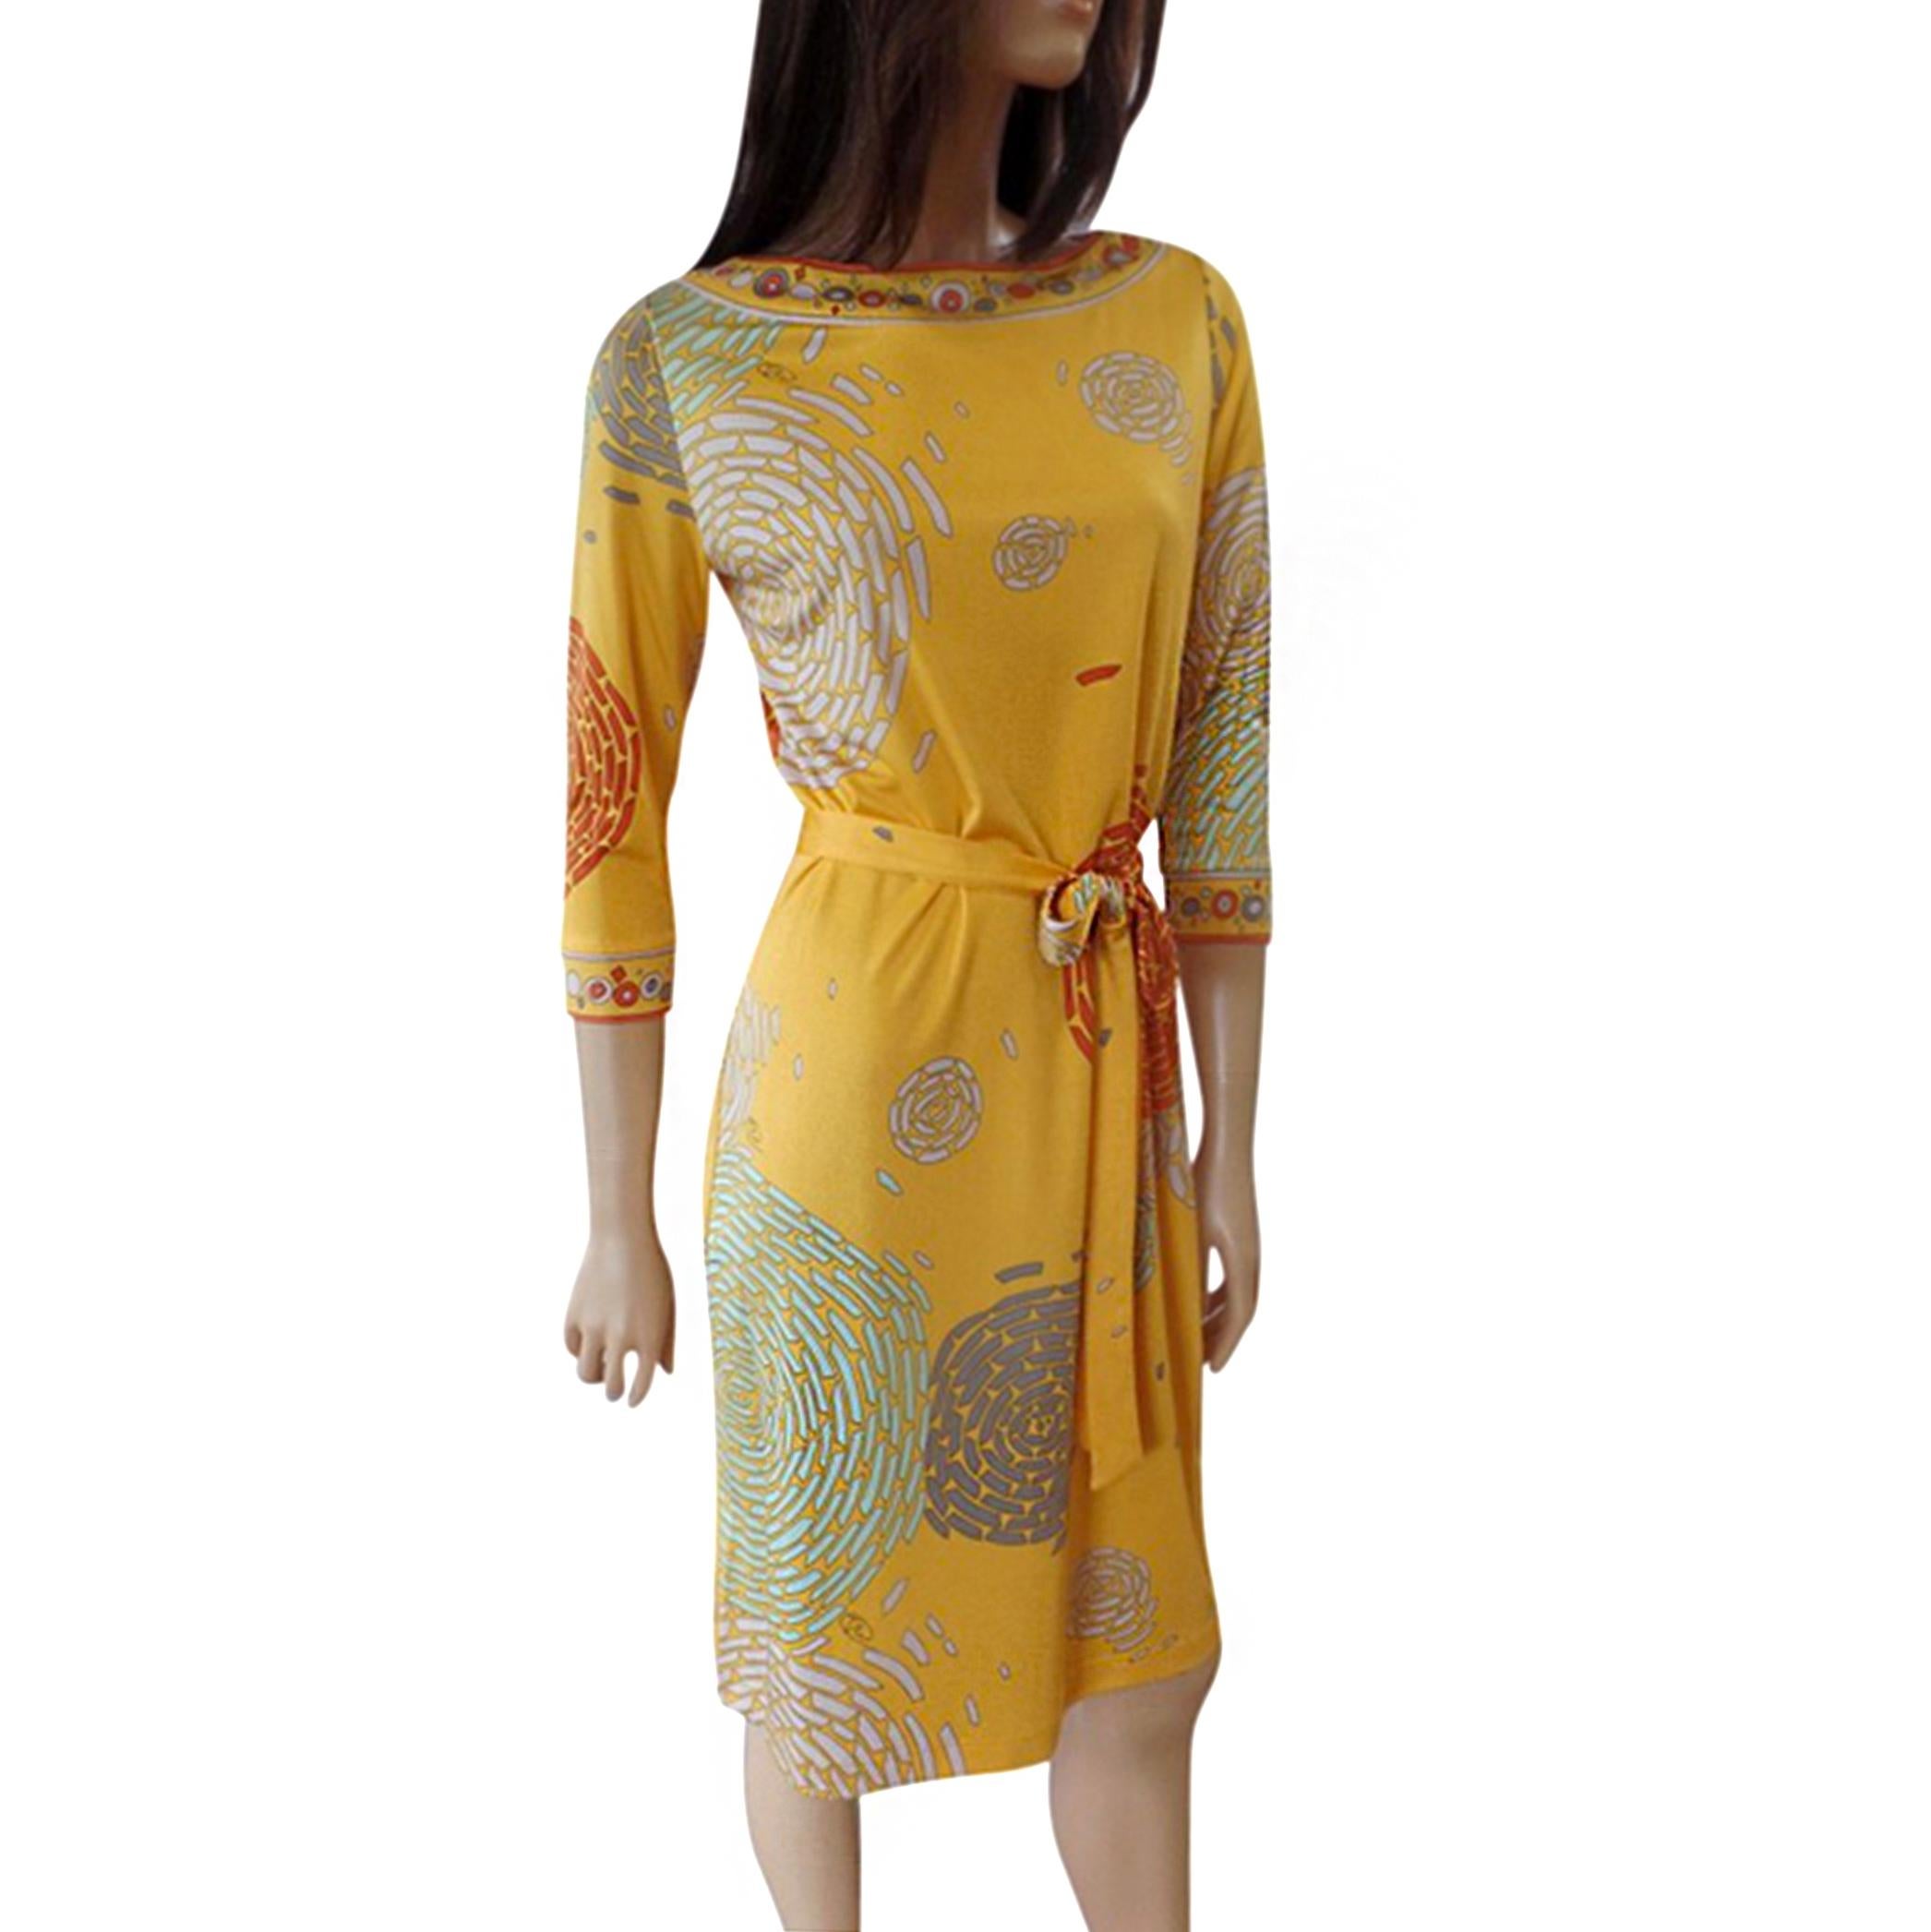 New with tag.
Flattering silk jersey mixed print dress in original, hand-signed 